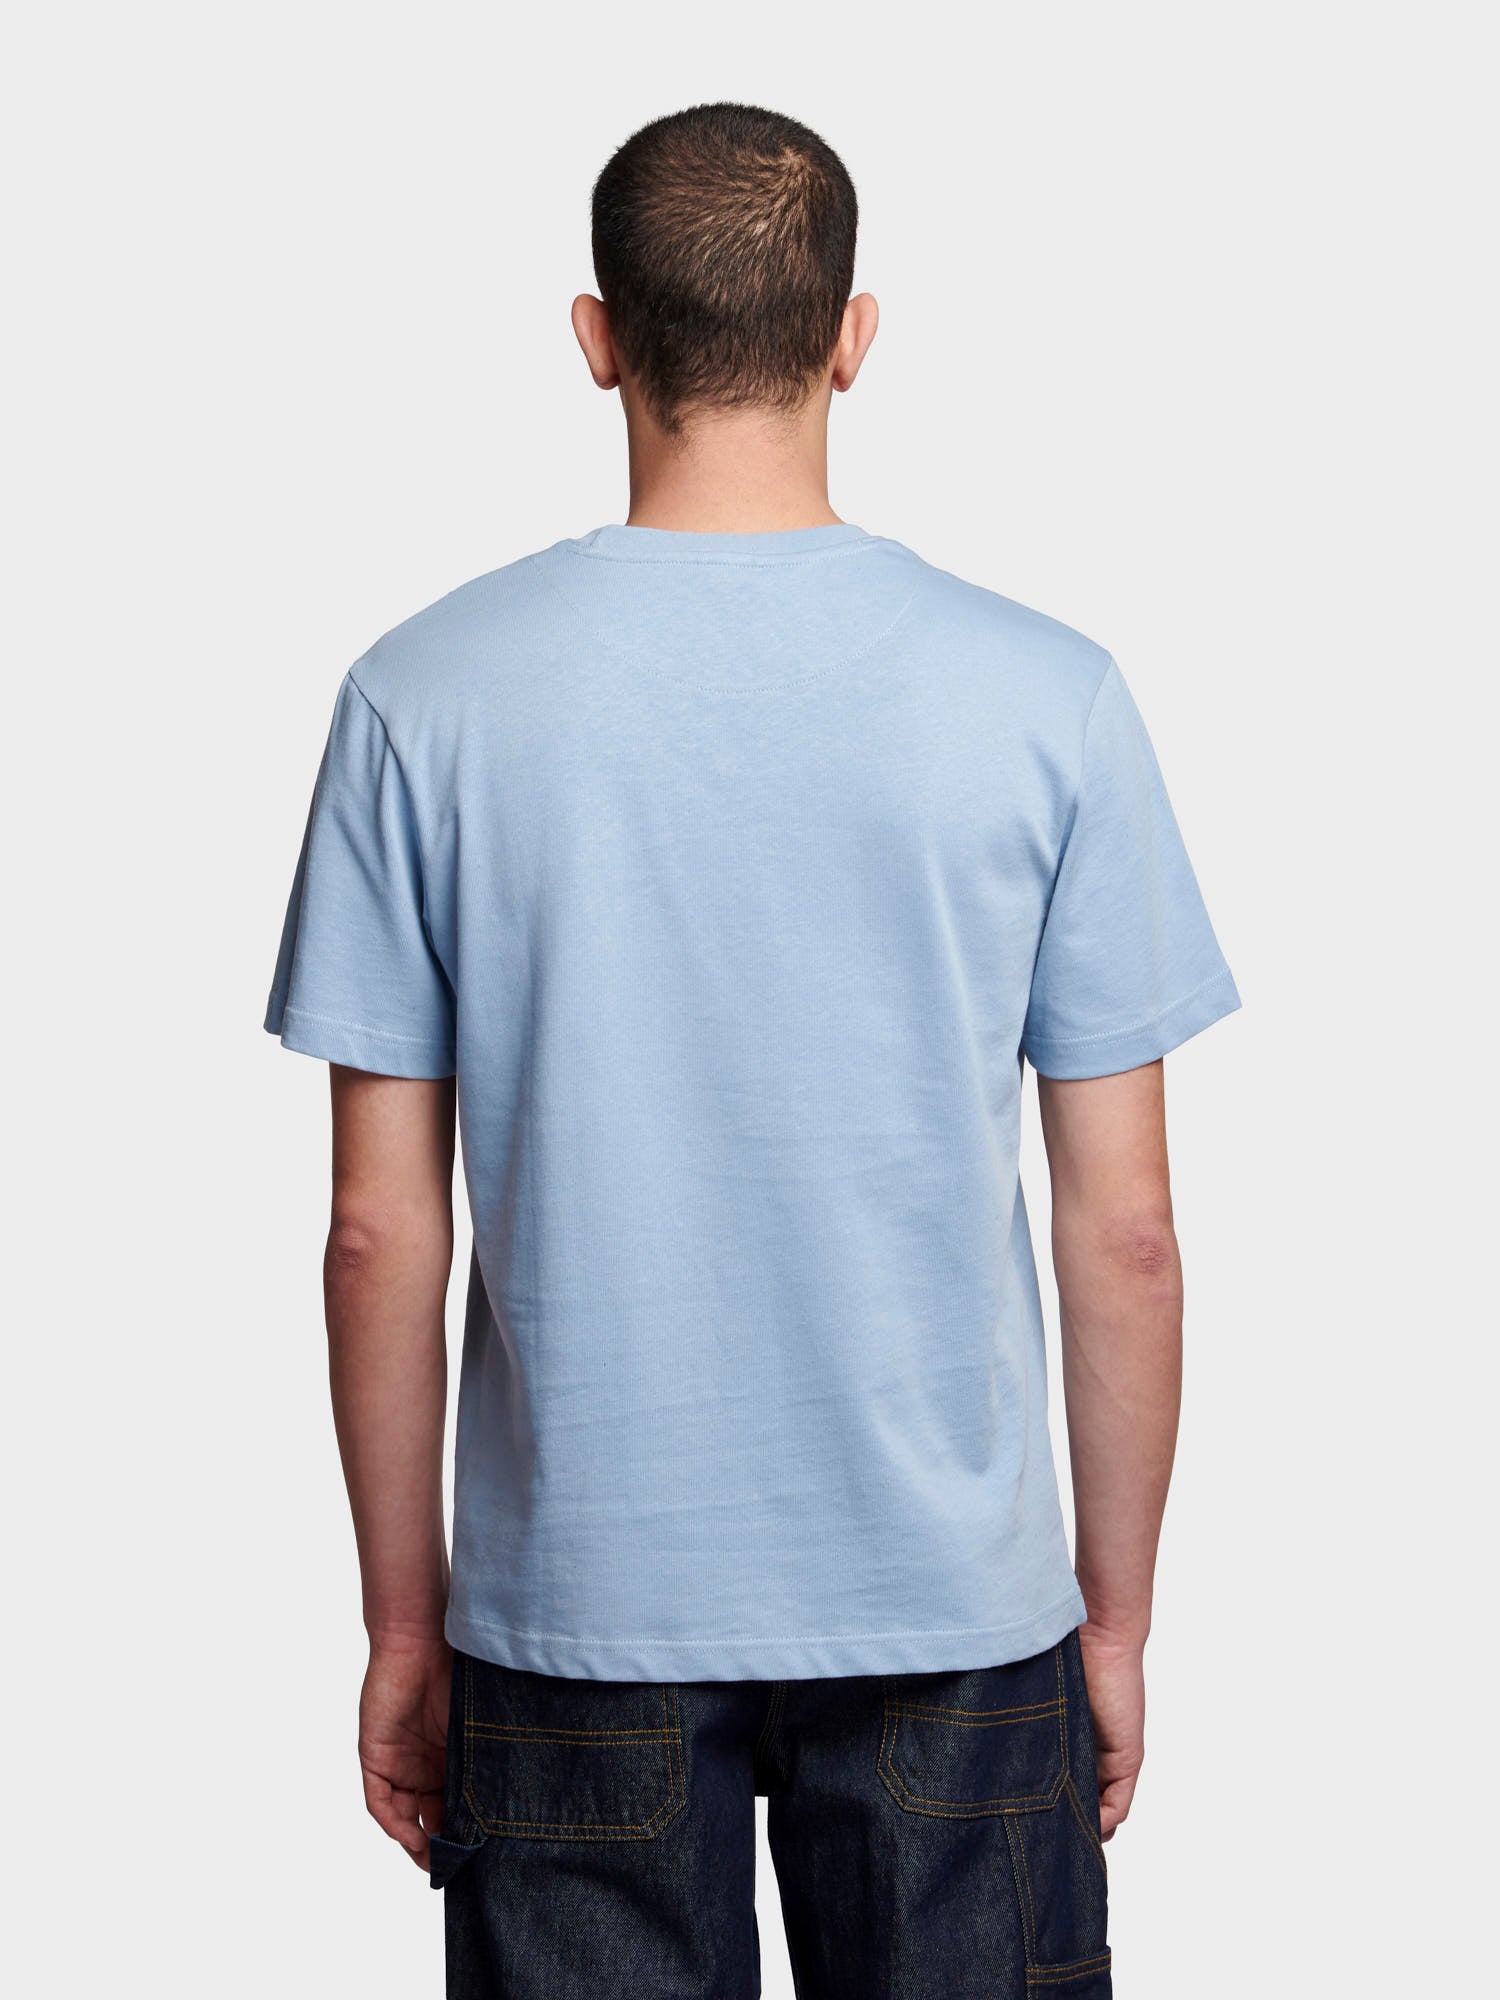 Relaxed Fit Embroidered Mountain T-Shirt in Soft Chambray